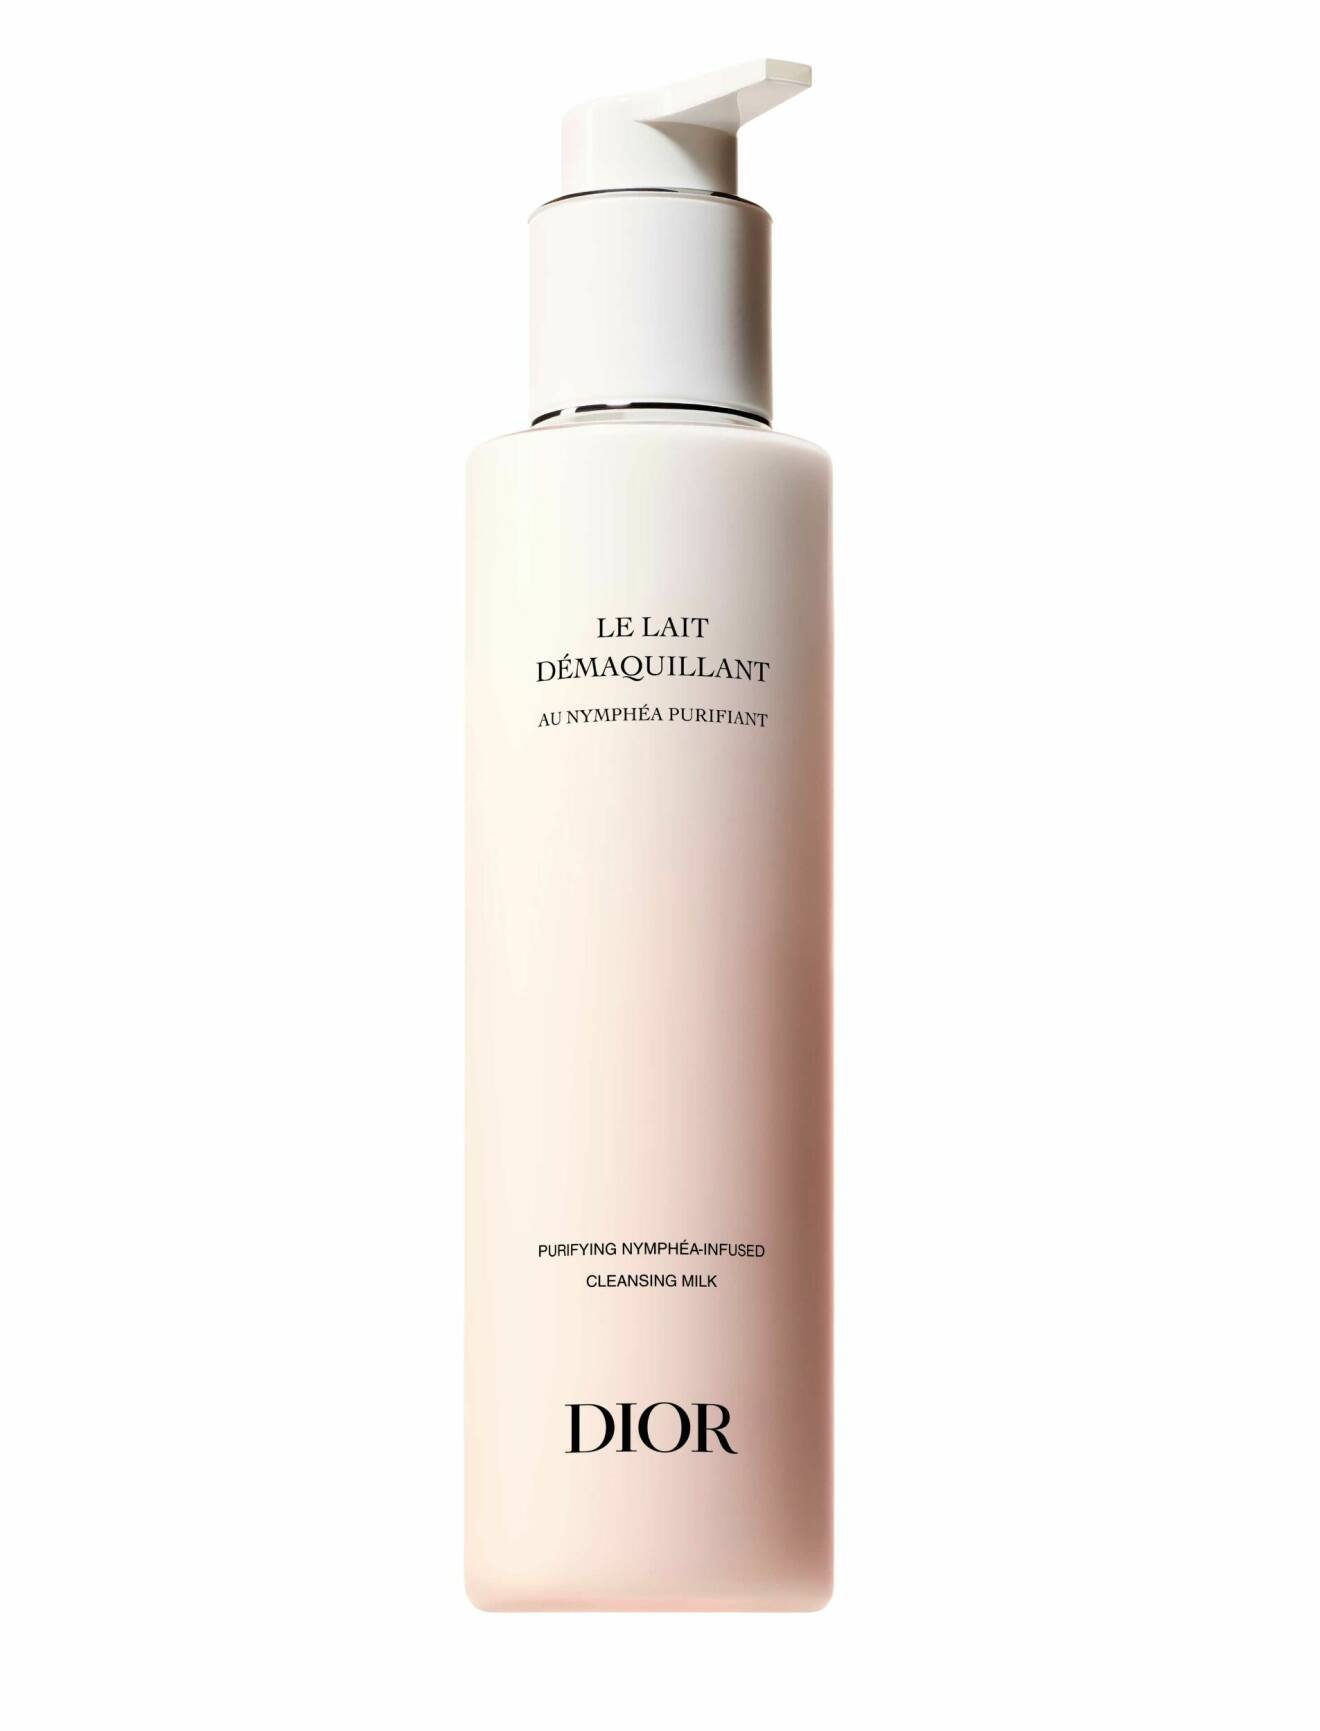 Purifying ­Nymphéa-Infused Cleansing Milk från Dior.